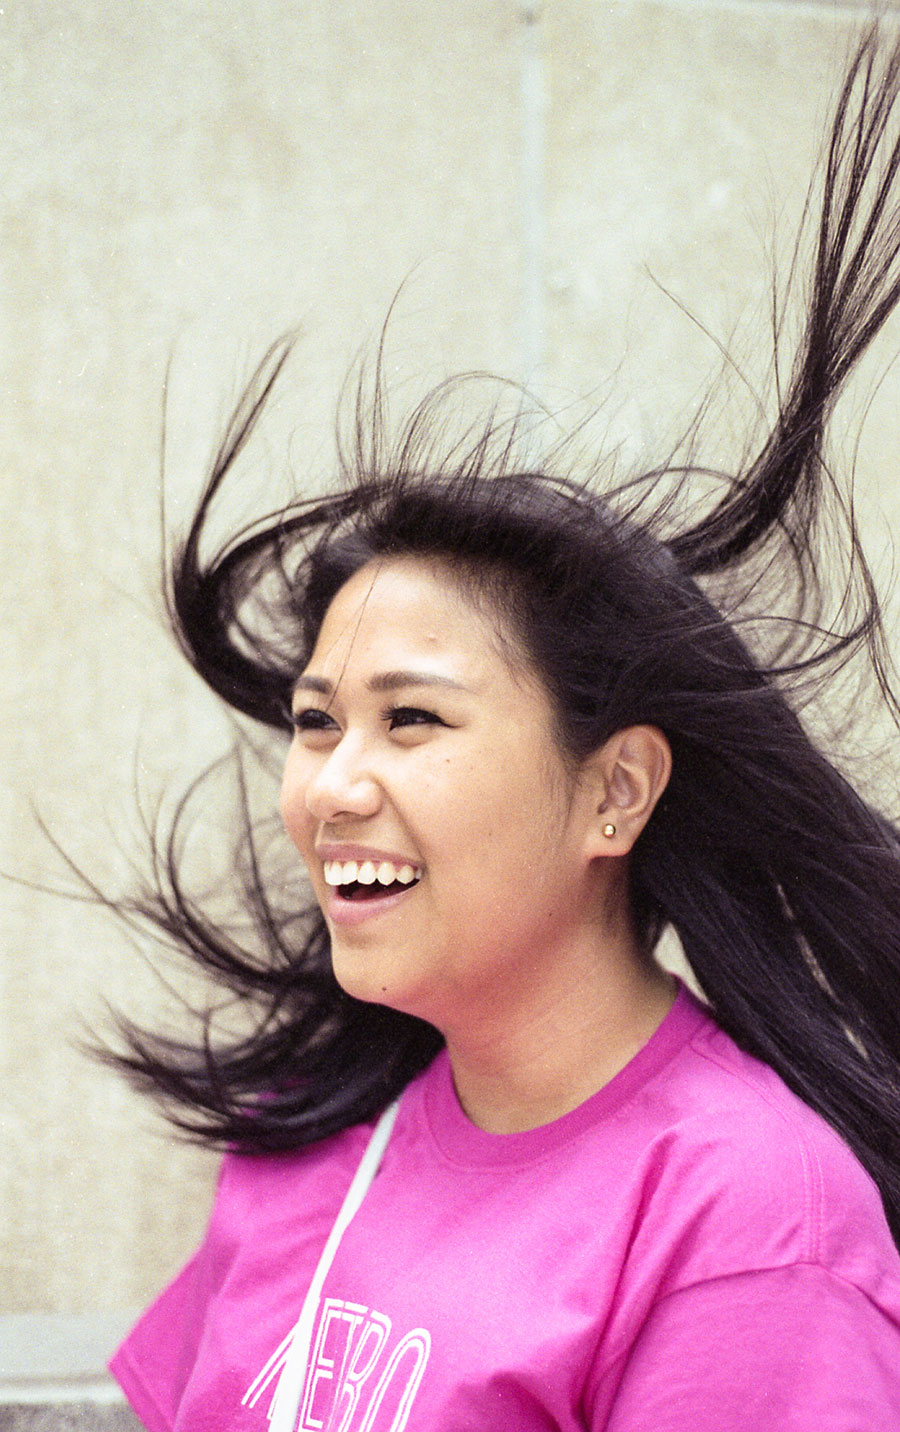 smiling young woman with hair blowing upward